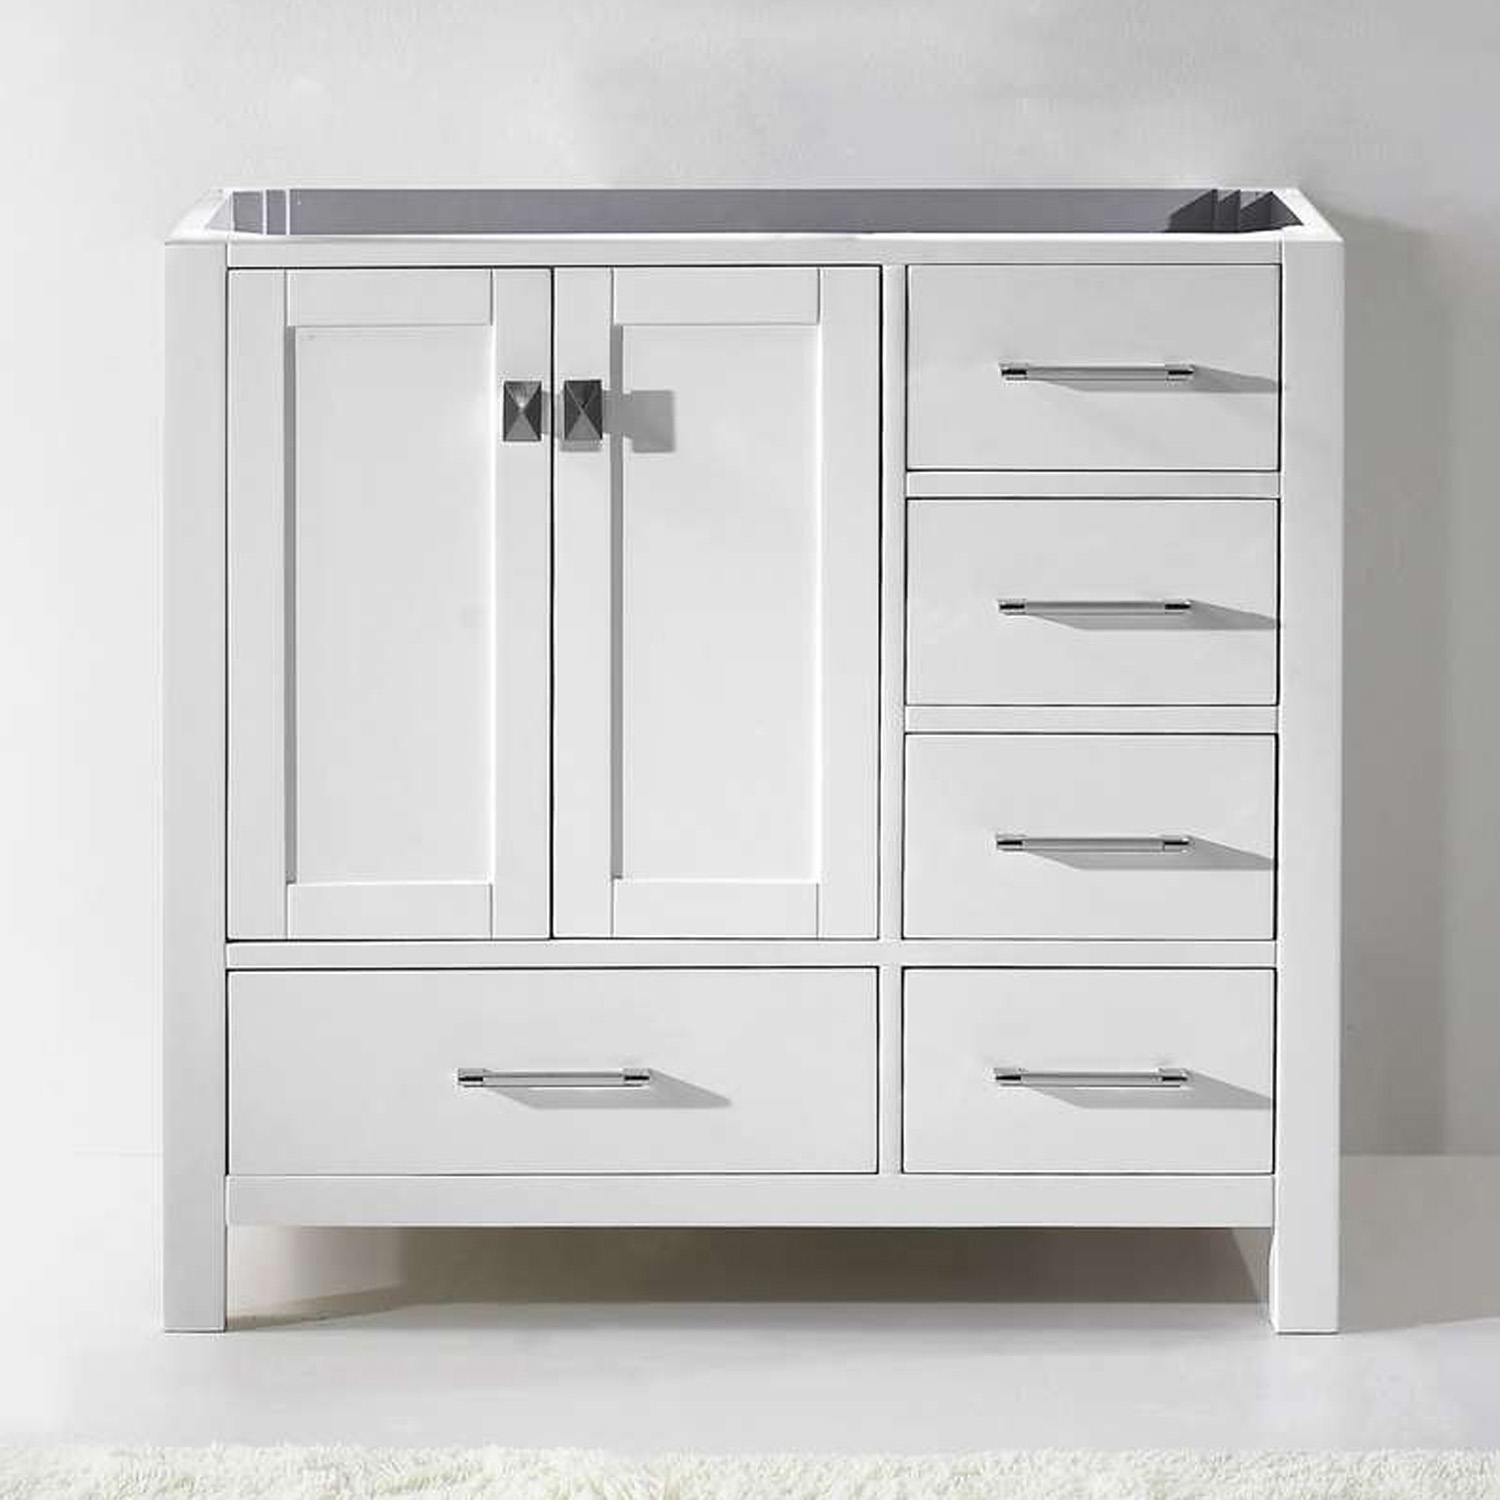 Issac Edwards Collection 36" Single Cabinet in White with 4 Top options